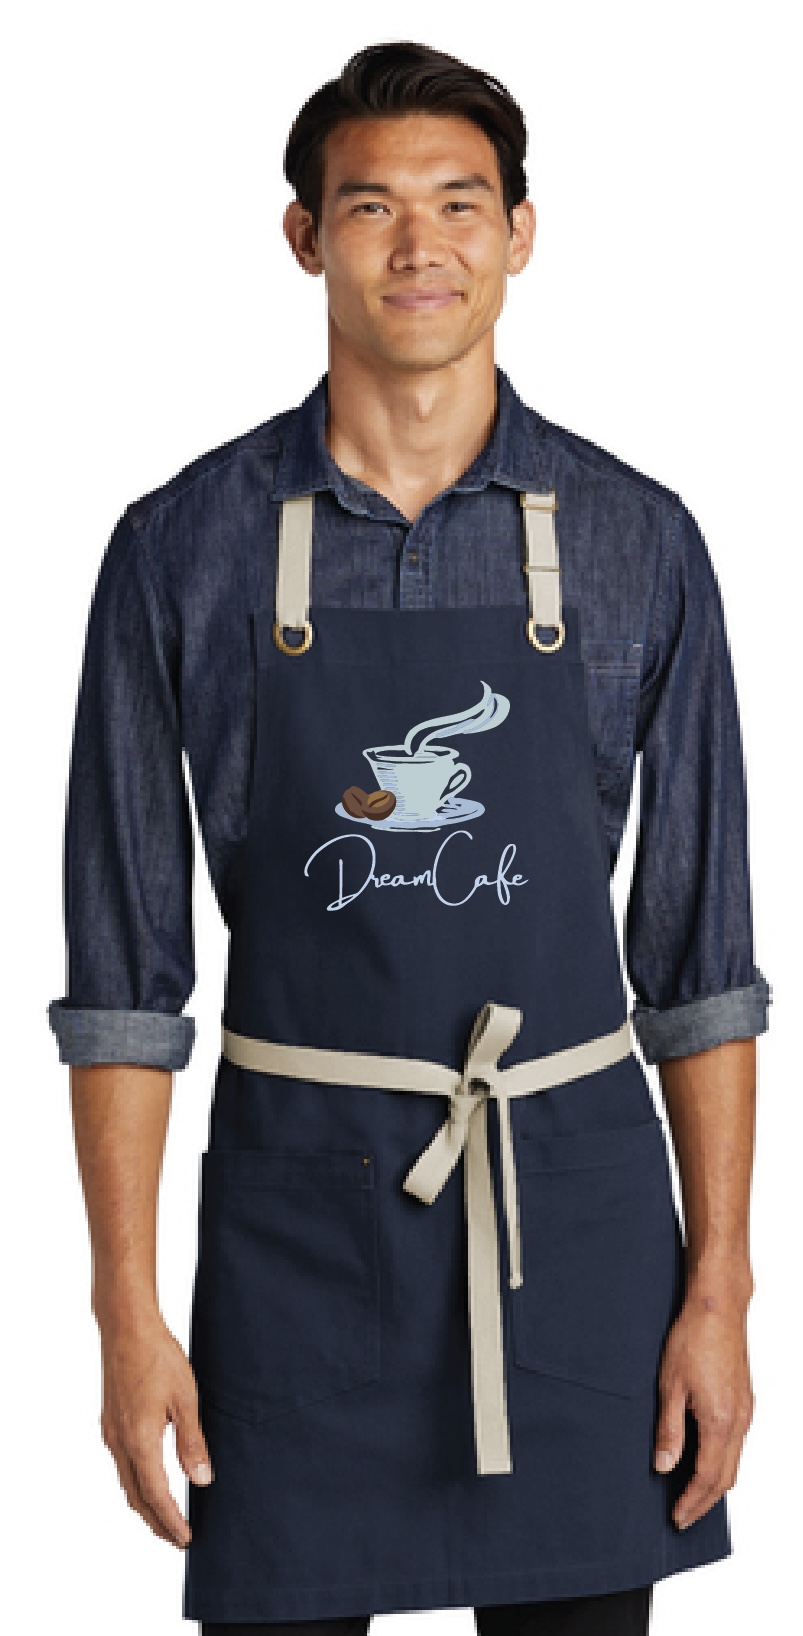 Aprons are available for purchase at the cafe